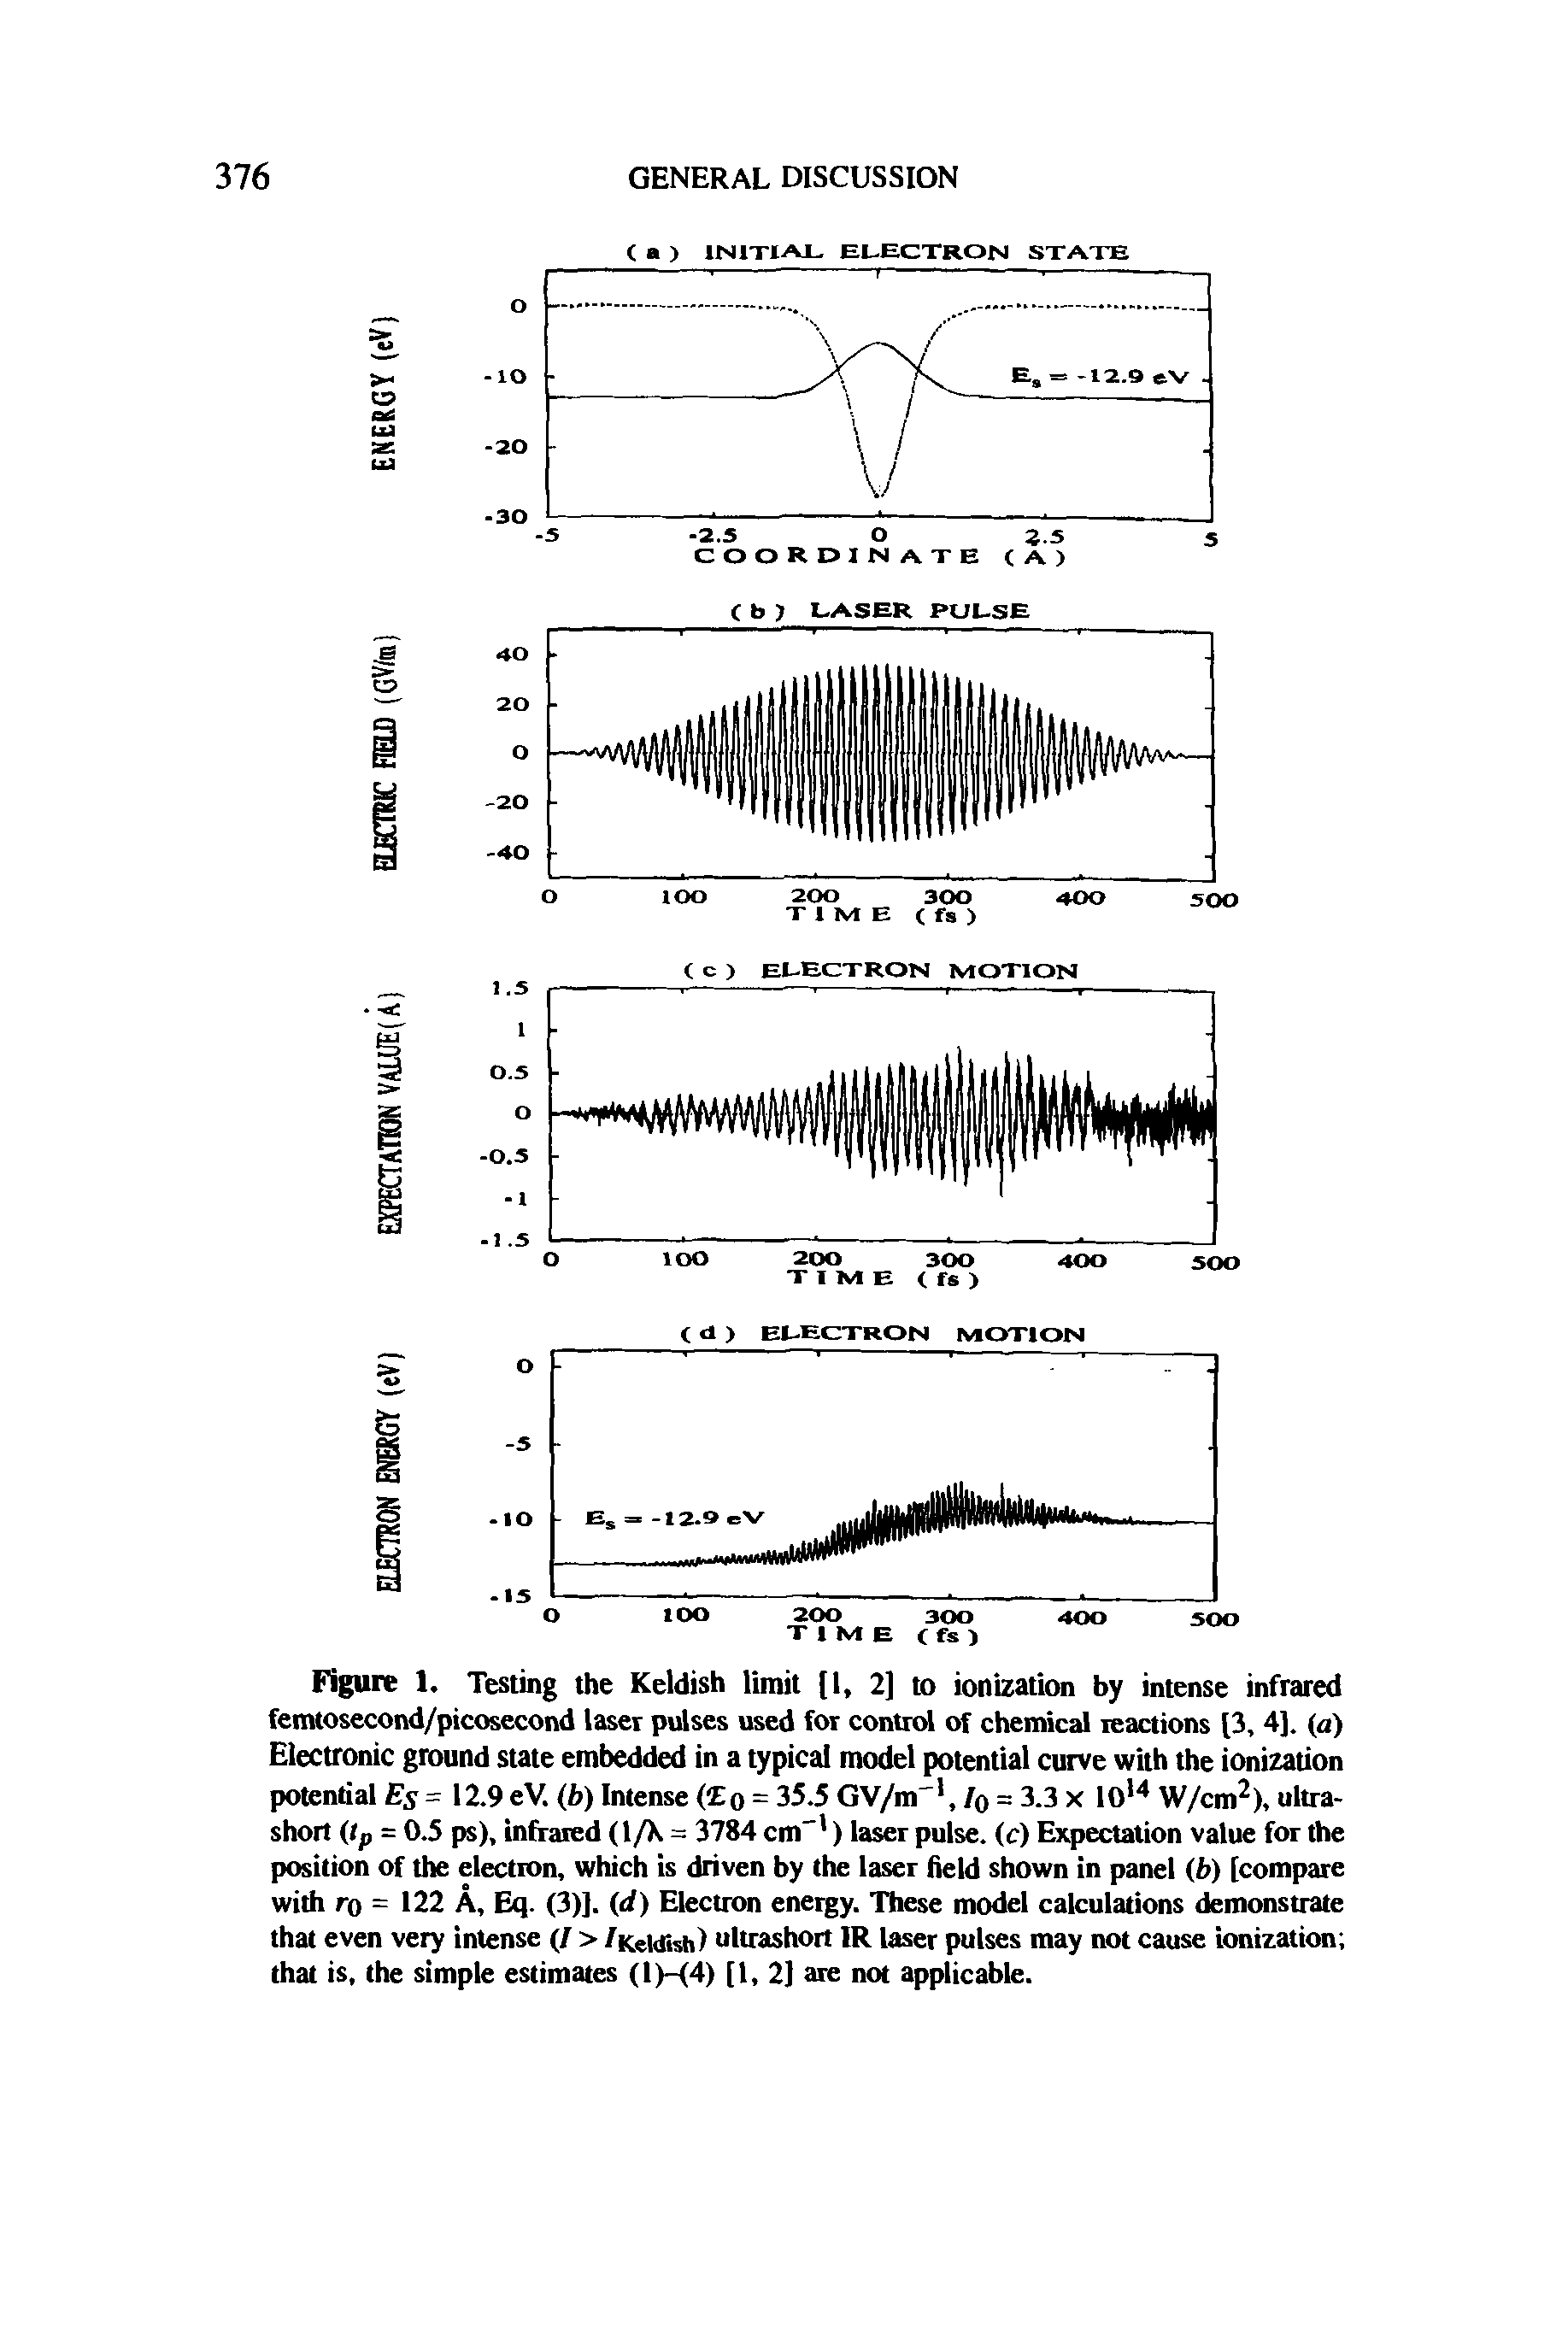 Figure 1. Testing the Keldish limit [1, 2] to ionization by intense infrared femtosecond/picosecond laser pulses used for control of chemical reactions [3, 4], (a) Electronic ground state embedded in a typical model potential curve with the ionization potential Es = 12.9 eV. (b) Intense ( o = 35.5 GV/m"1, Iq = 3.3 x 1014 W/cm2), ultra-short (tp = 0.5 ps), infrared (l/X = 3784 cm" ) laser pulse, (c) Expectation value for the position of the election, which is driven by the laser held shown in panel (b) [compare with ro = 122 A, Eq. (3)]. (d) Electron energy. These model calculations demonstrate that even very intense (/ > /Keldish) ultrashort 1R laser pulses may not cause ionization that is, the simple estimates (1)—<4) [1, 2] are not applicable.